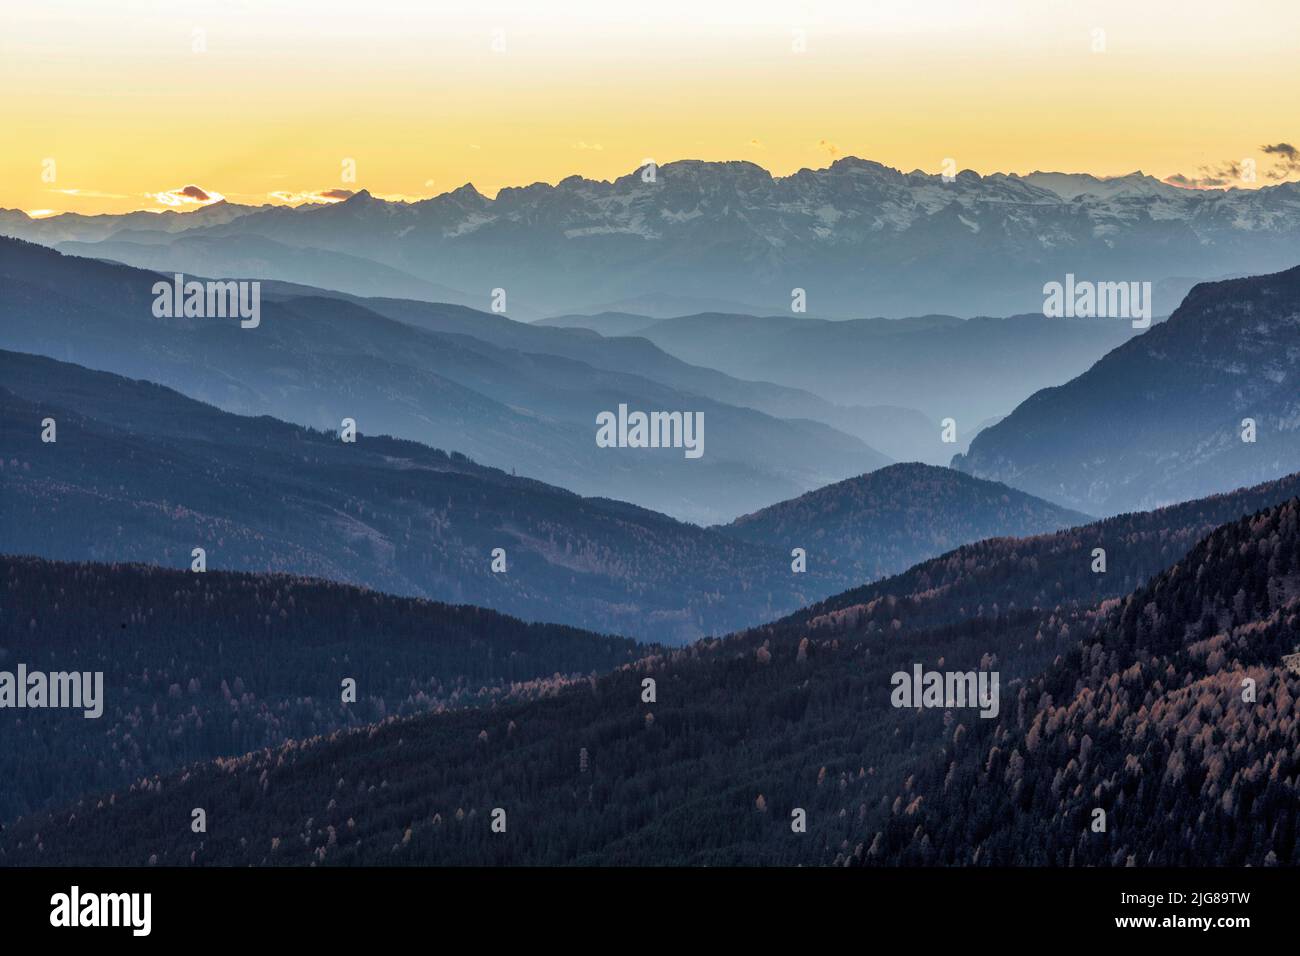 Italy, Trentino Alto Adige, province of Trento, landscape seen from the Caladora / Venegia saddle towards the chain of Lagorai and the valleys below Stock Photo